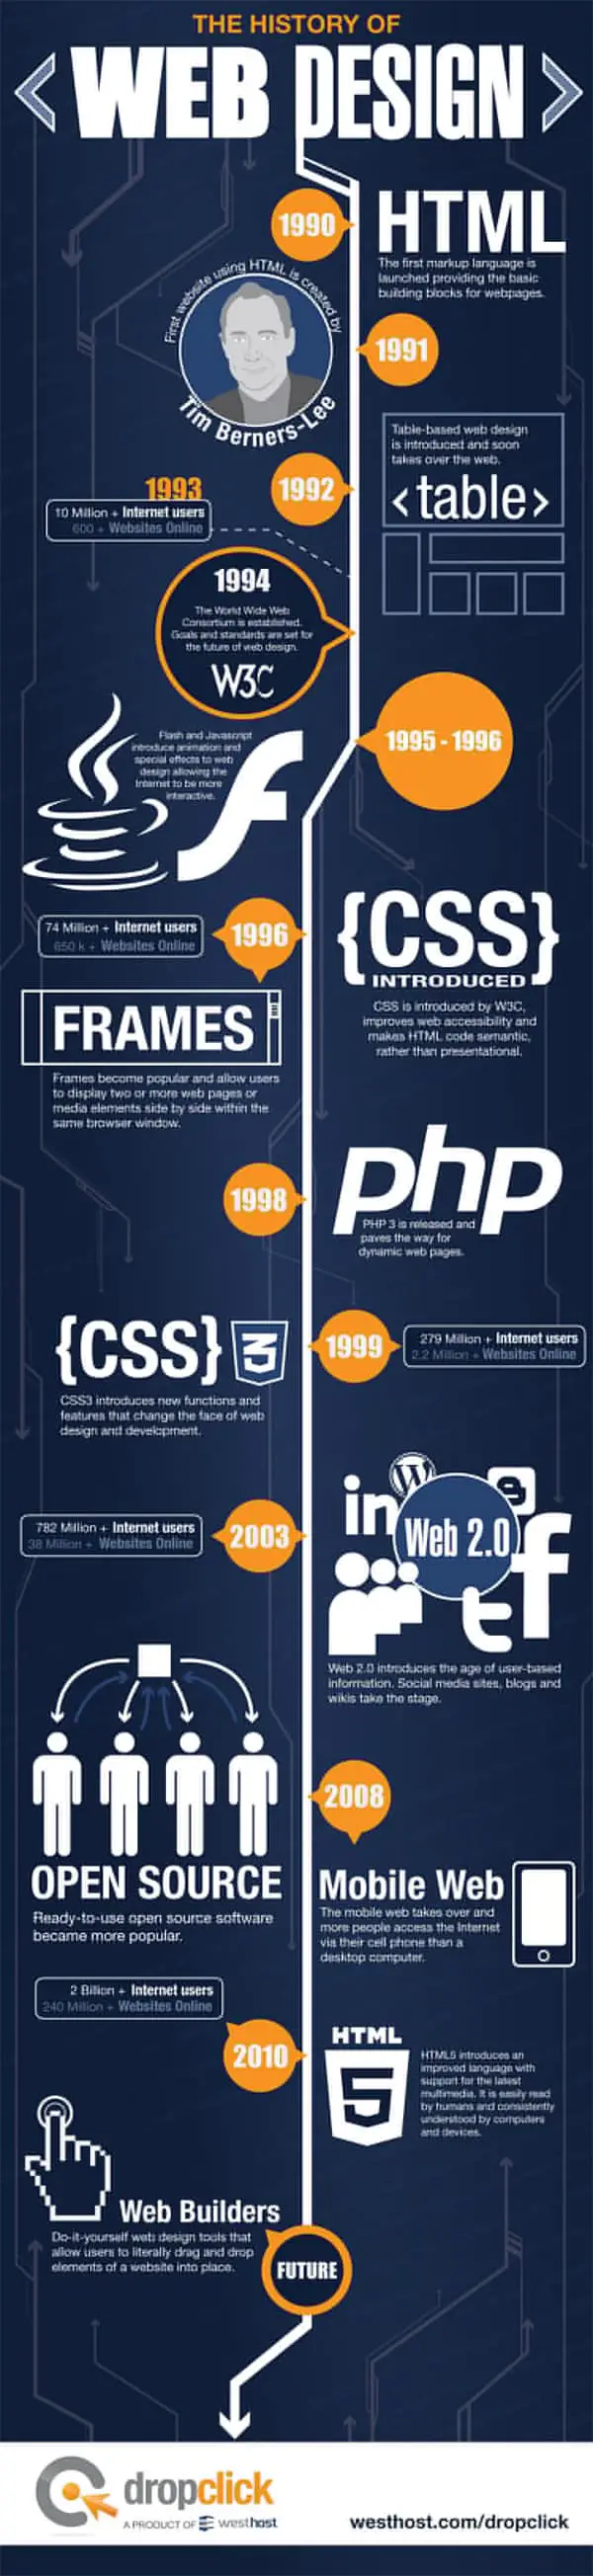 The History of Web Design by WestHost